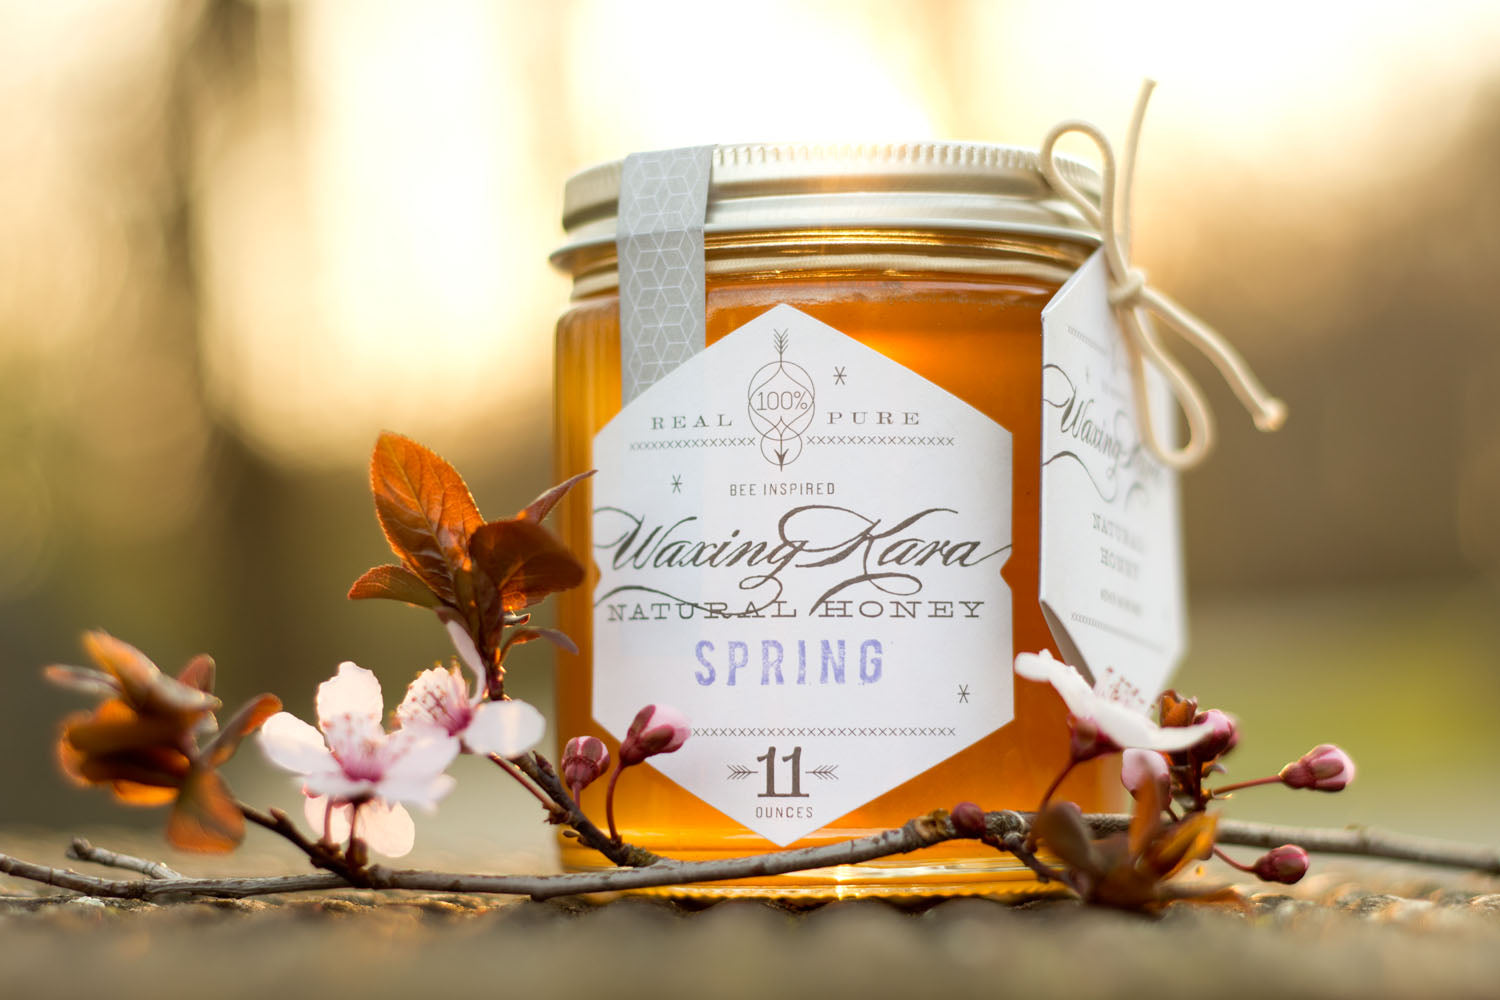 This heroic jar of Bee Inspired Spring Honey is magic in a bottle.